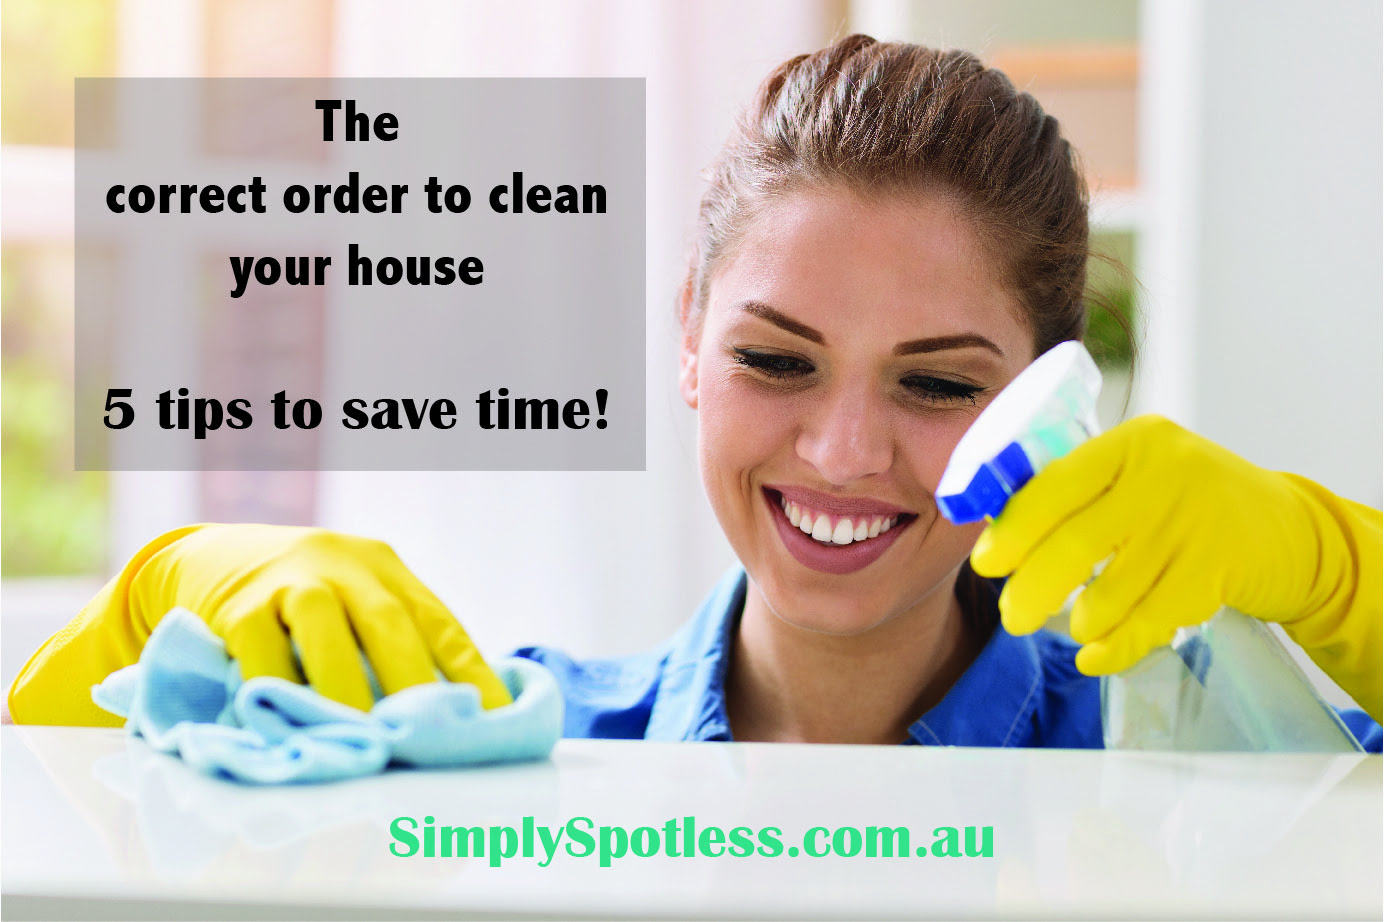 What order do you clean your house?